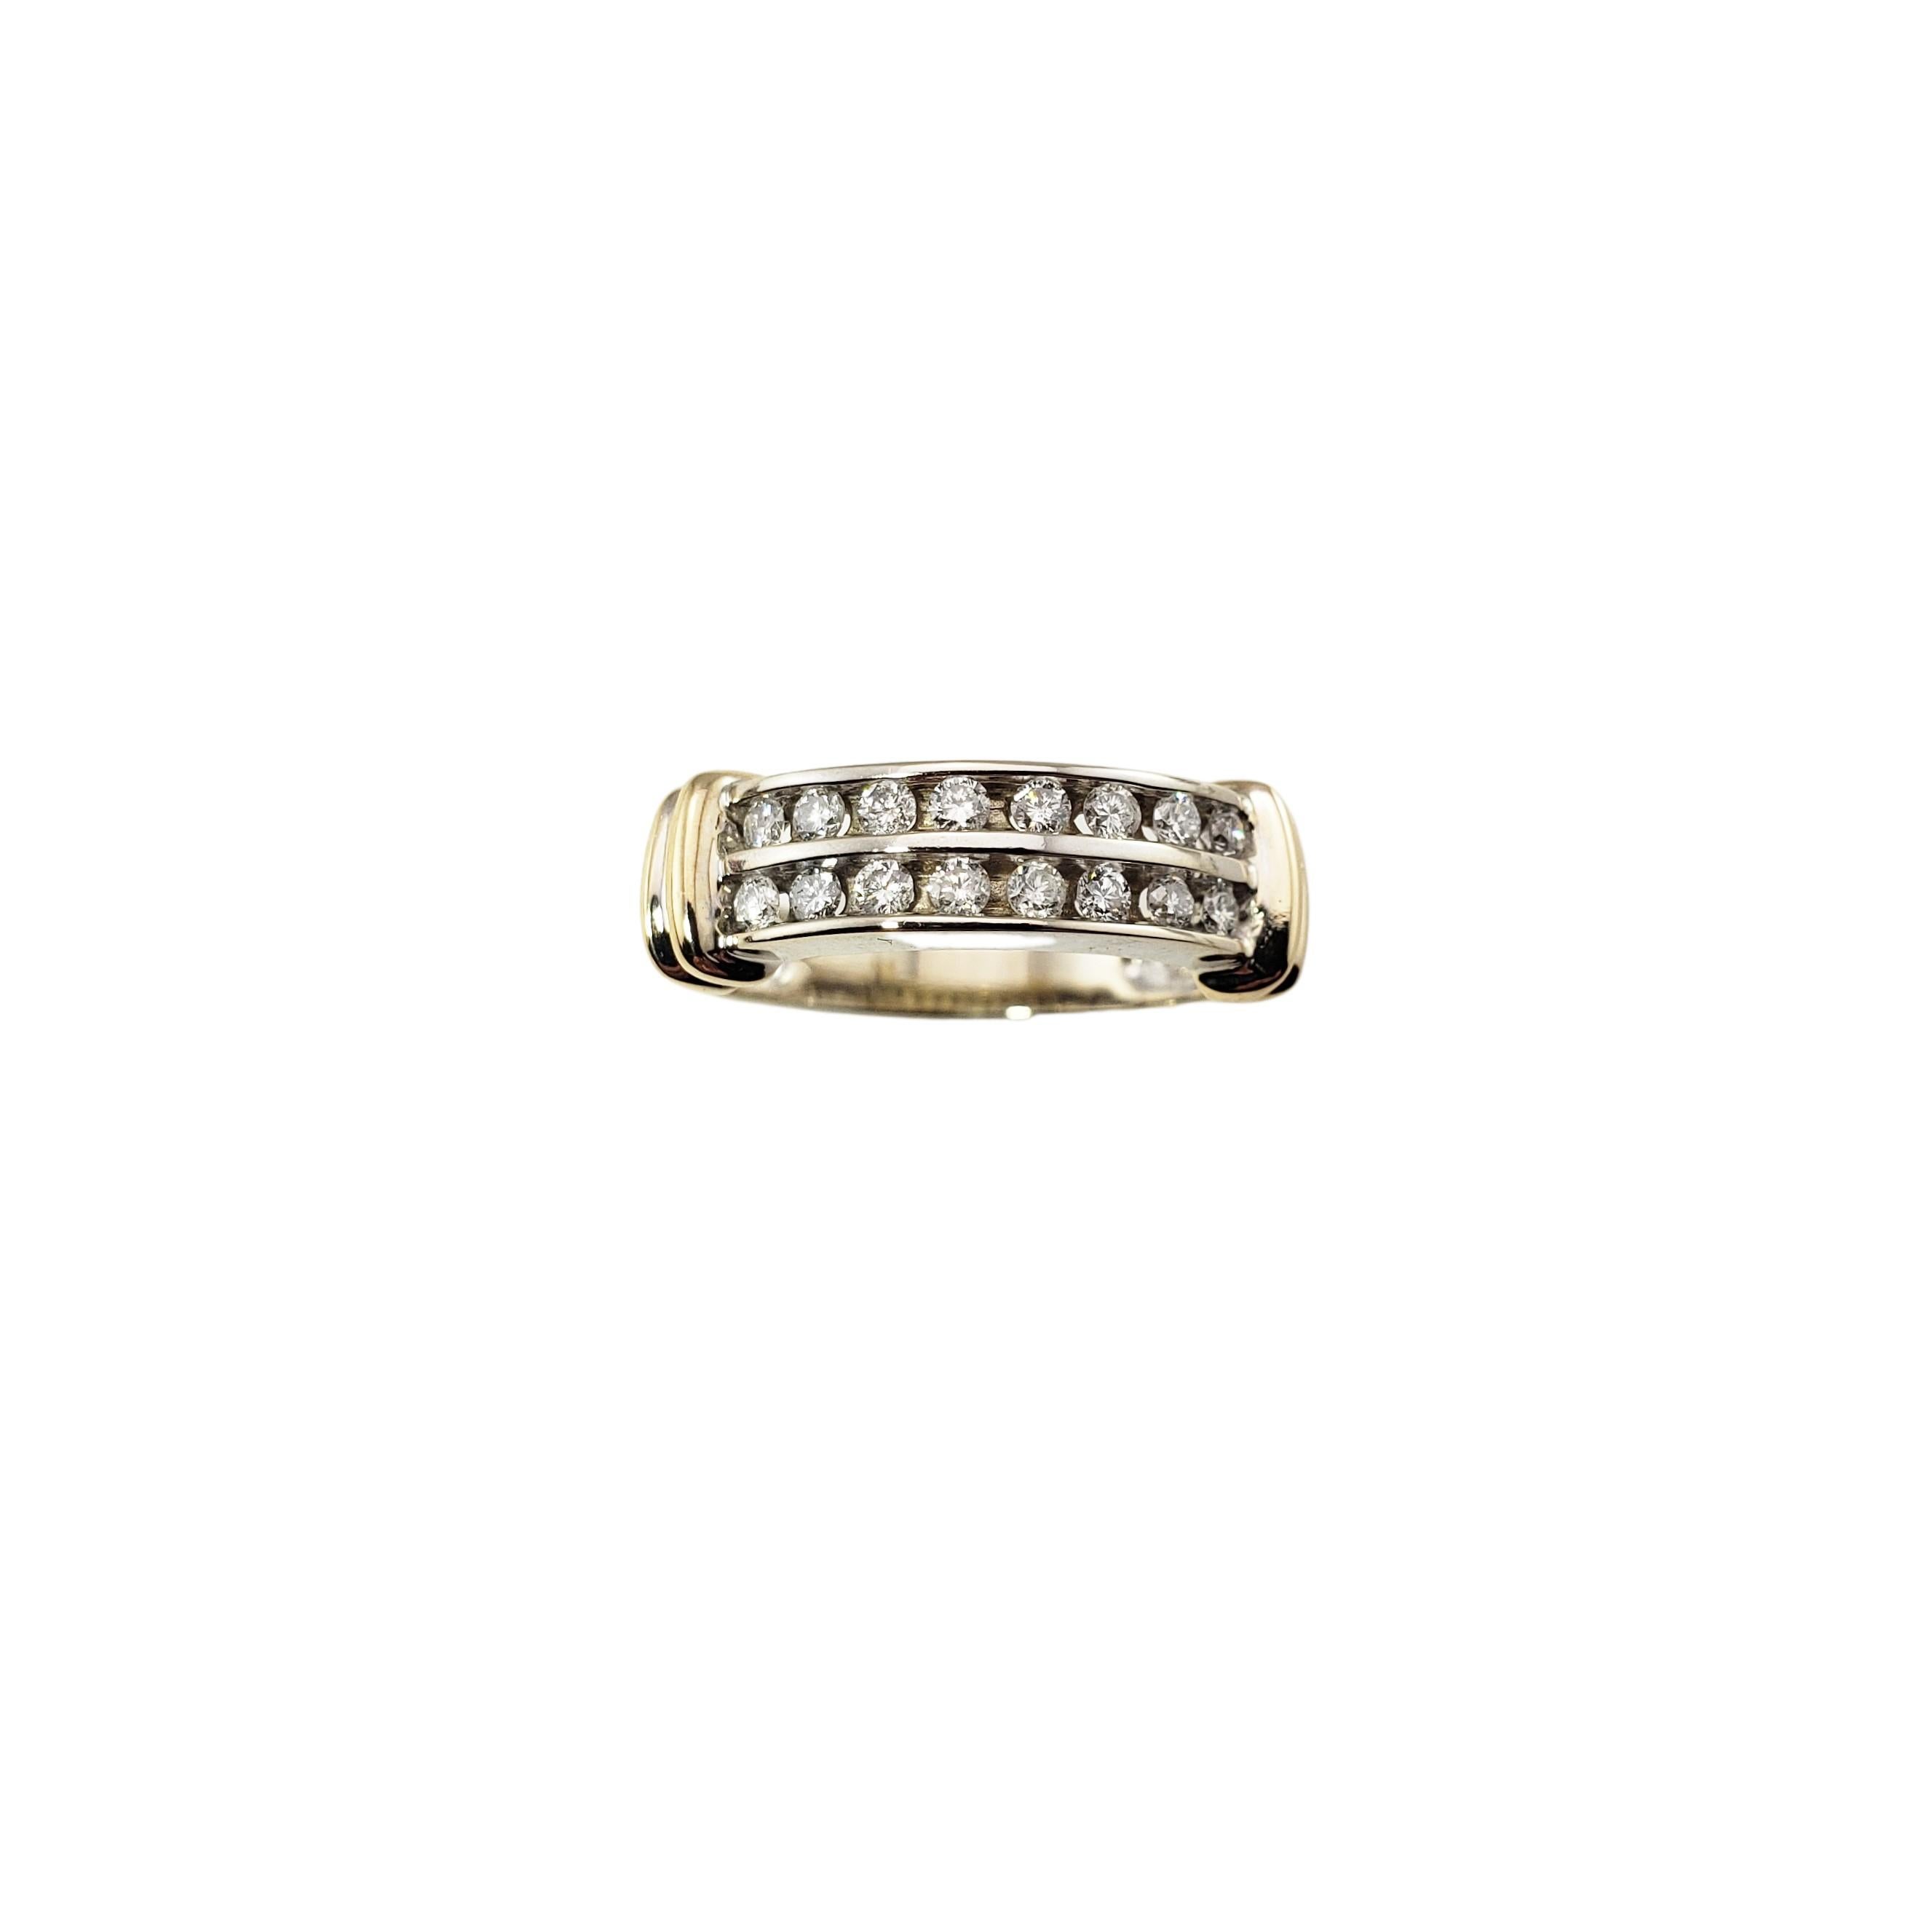 14 Karat White/Yellow Gold and Diamond Ring Size 7-

This sparkling ring features 16 round brilliant cut diamonds set in classic 14K white and yellow gold.  Width:  5 mm.  Shank:  3 mm.

Approximate total diamond weight: .48 ct.

Diamond color: